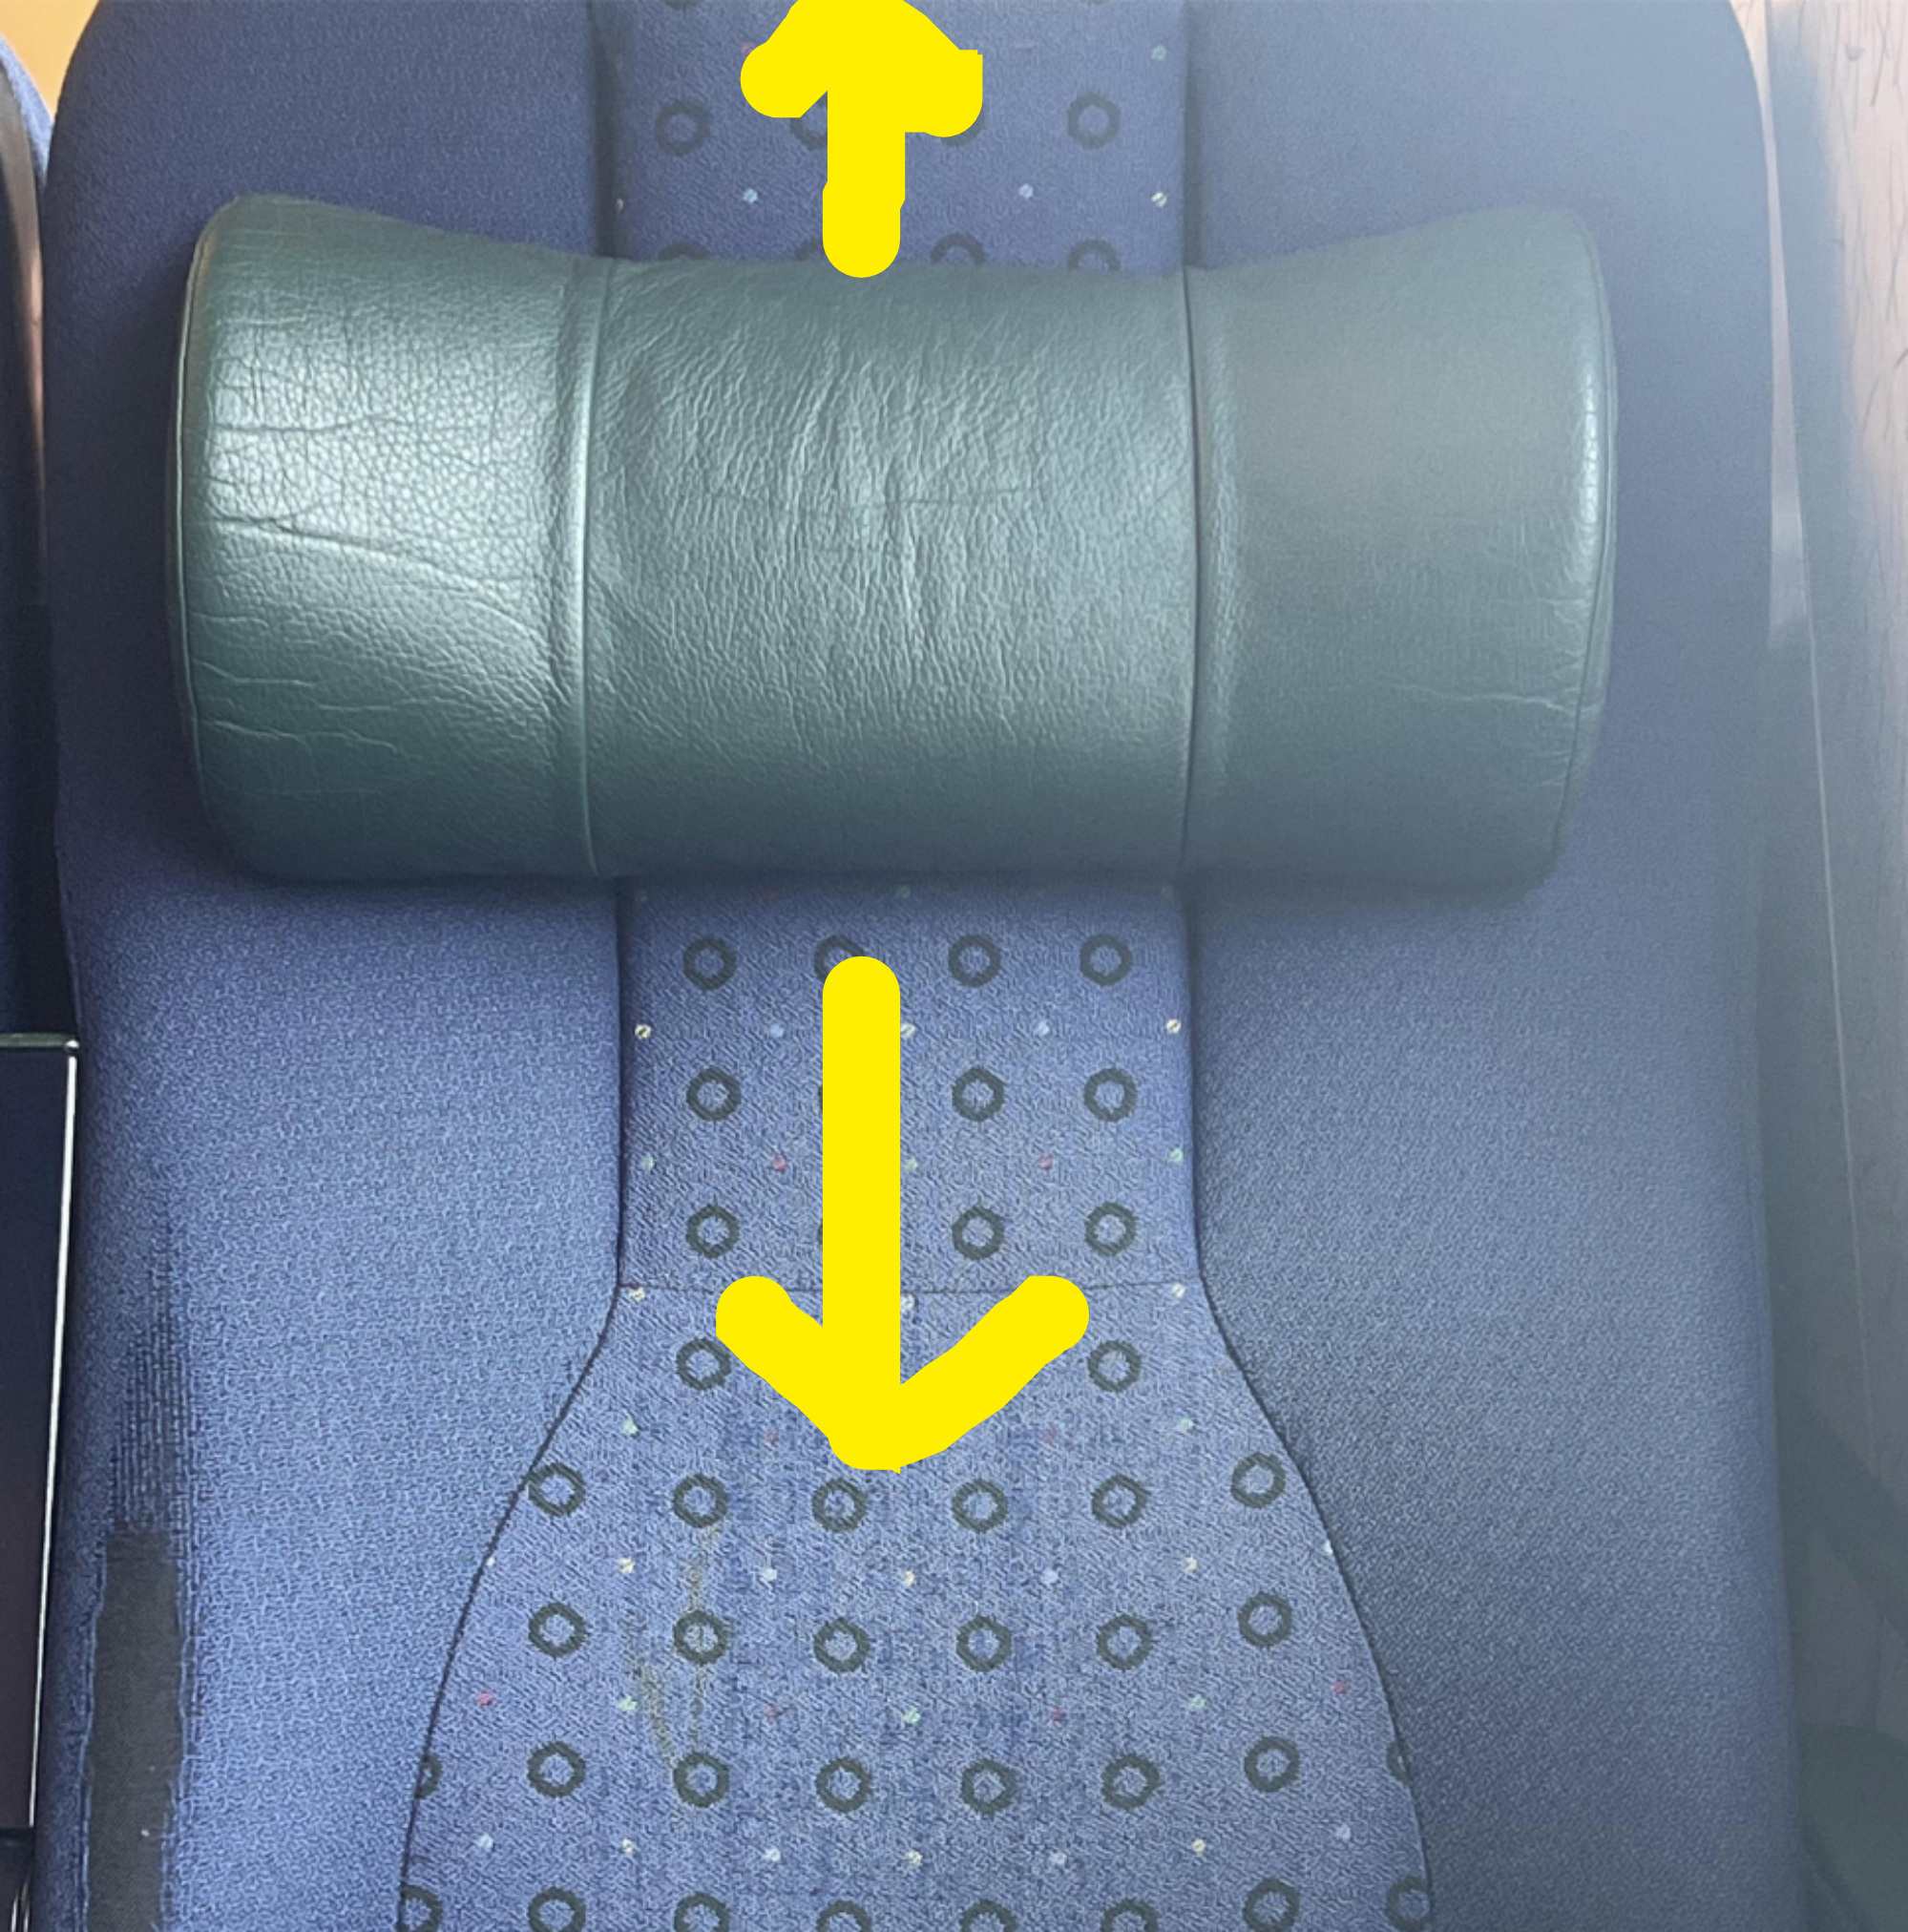 The seat has a headrest that is currently in the middle of the seat and be moved higher or lower, depending on the passenger&#x27;s height